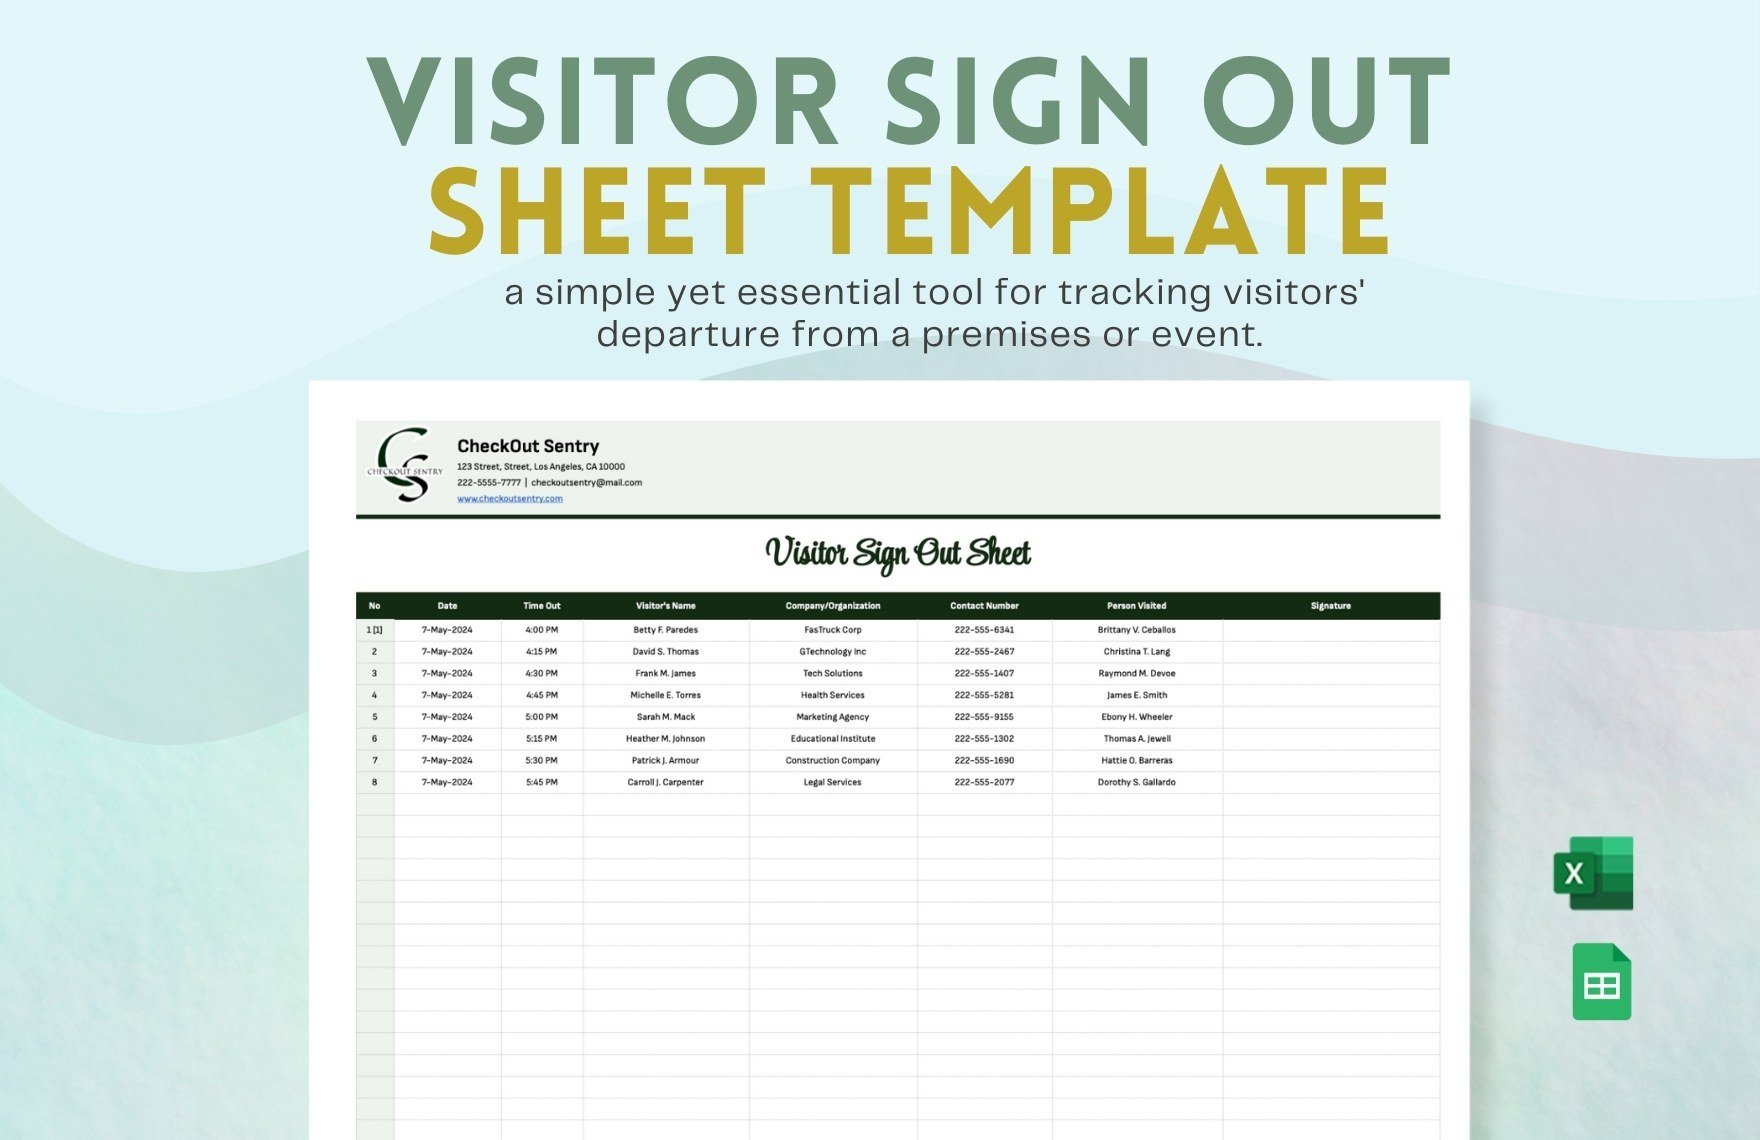 Visitor Sign Out Sheet Template in Excel, Google Sheets